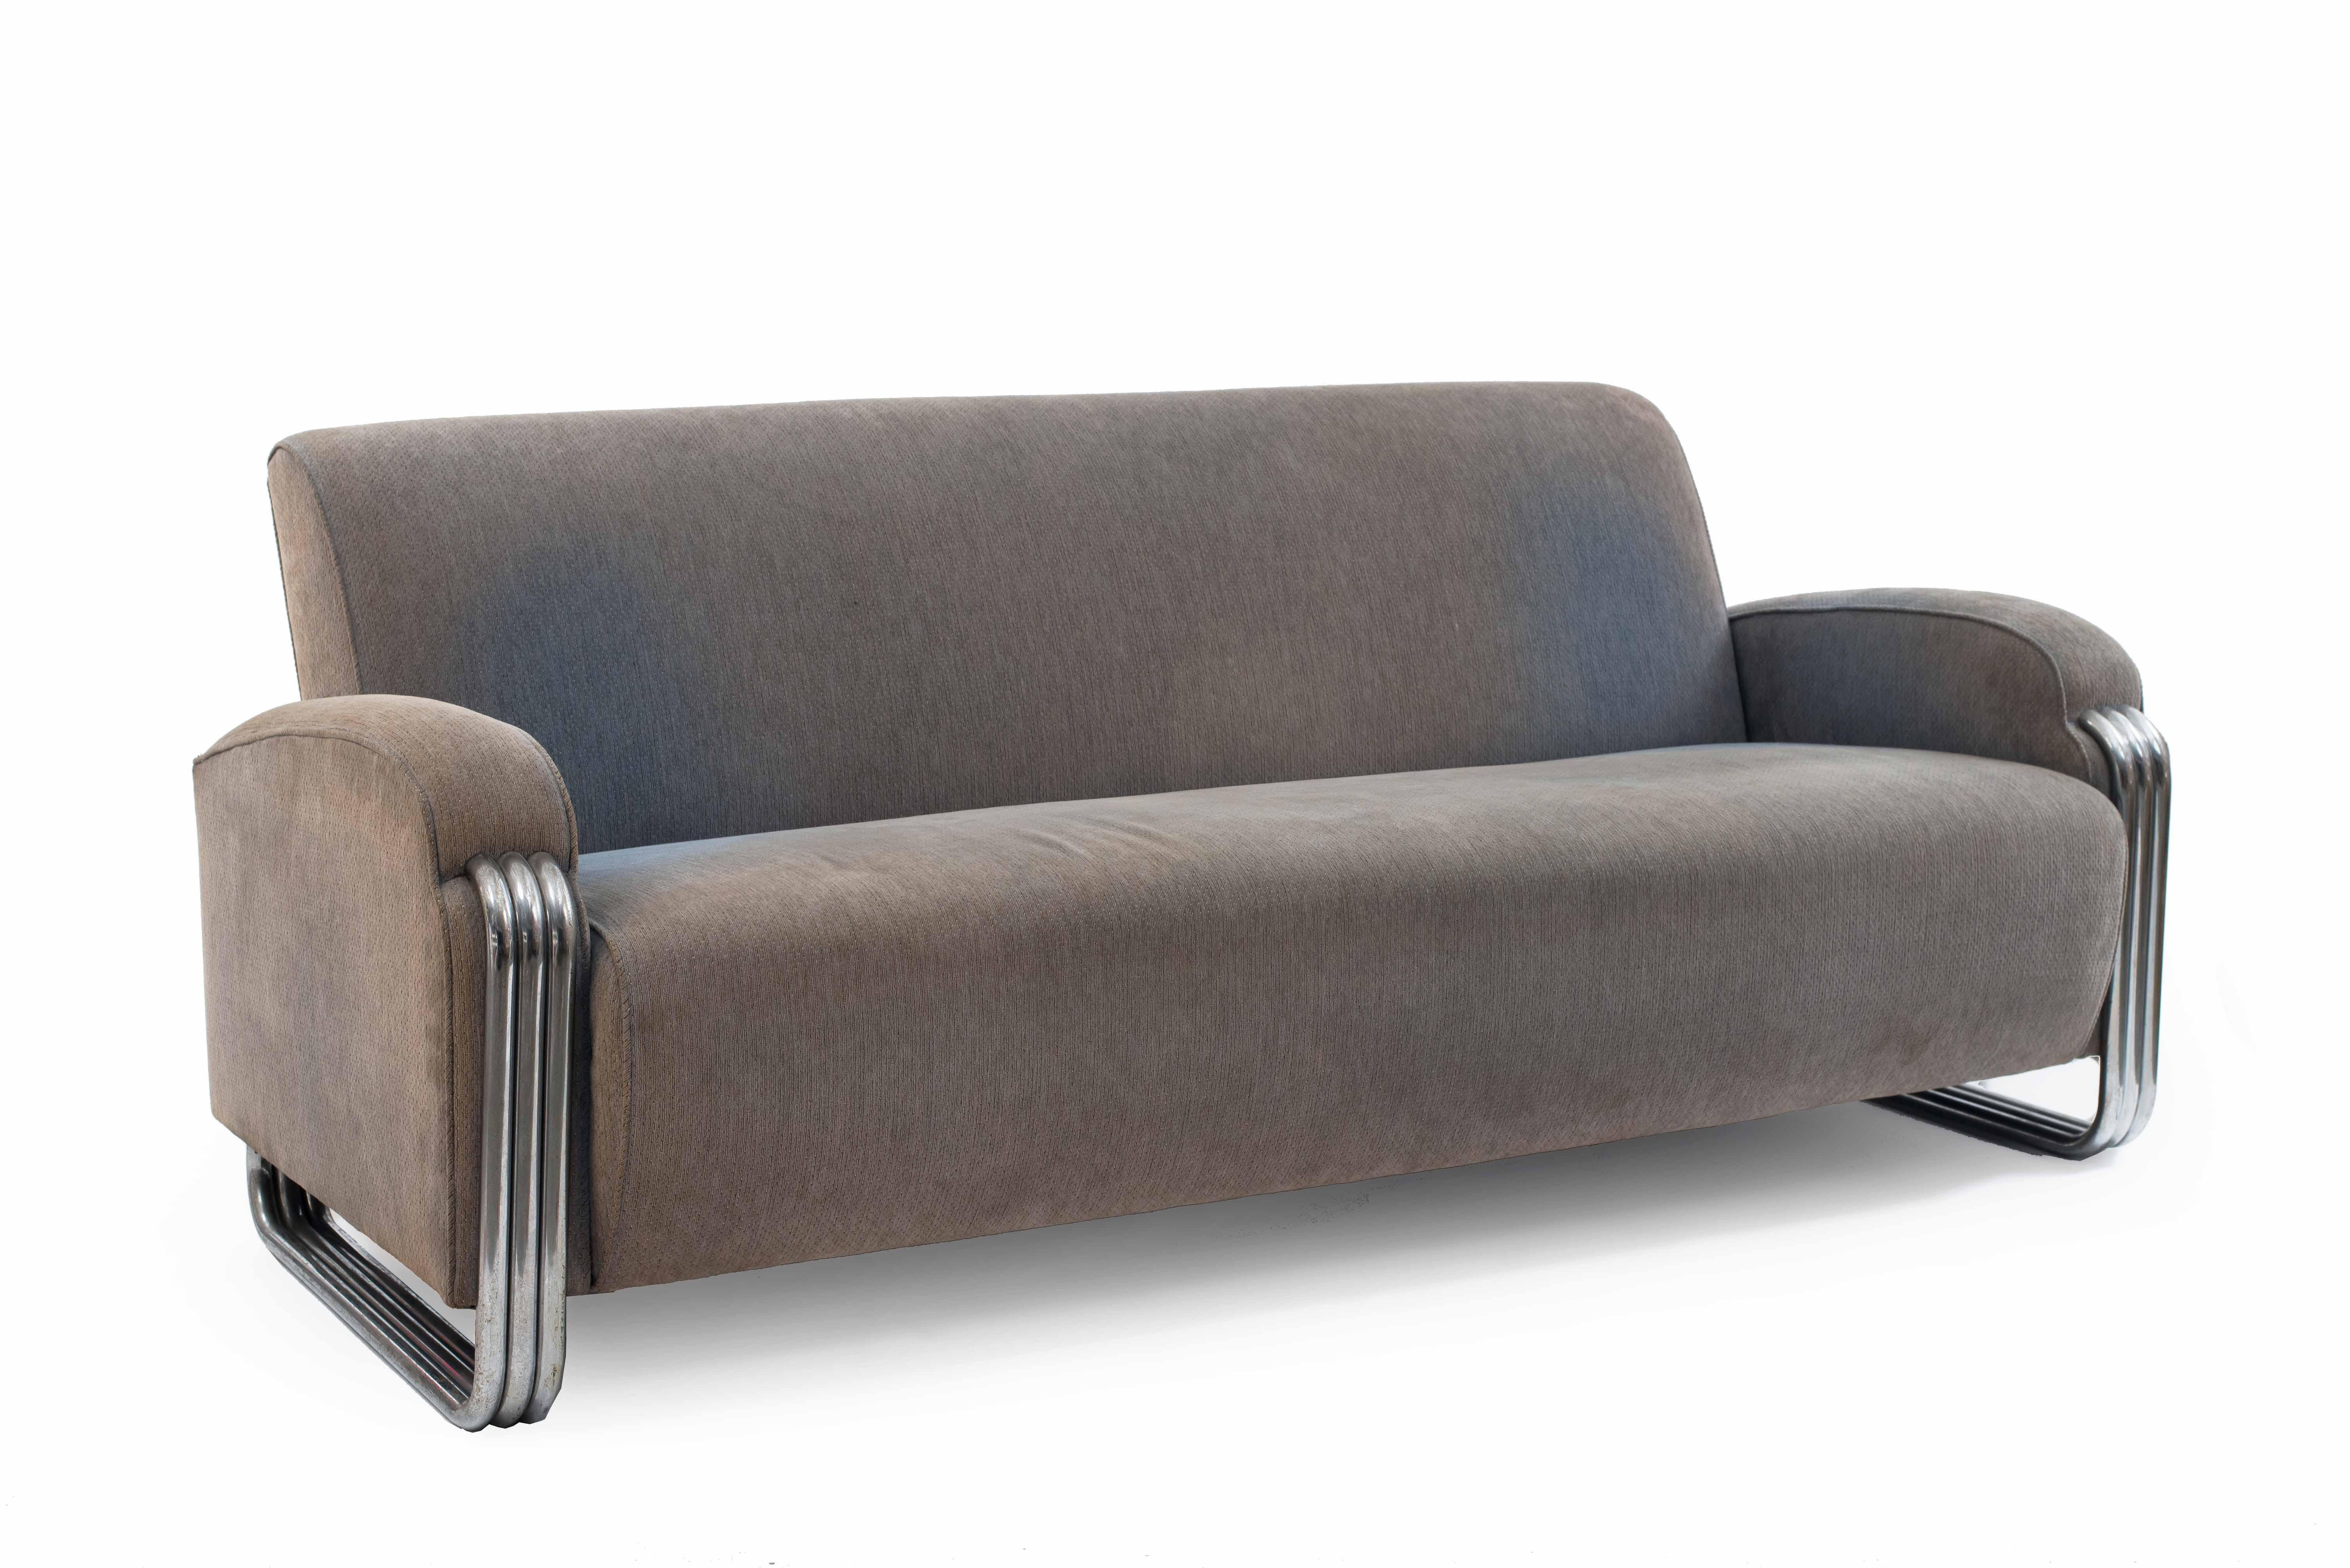 American Art Deco three-seat sofa with gray/blue upholstery and chrome accents (att; KEM WEBER).